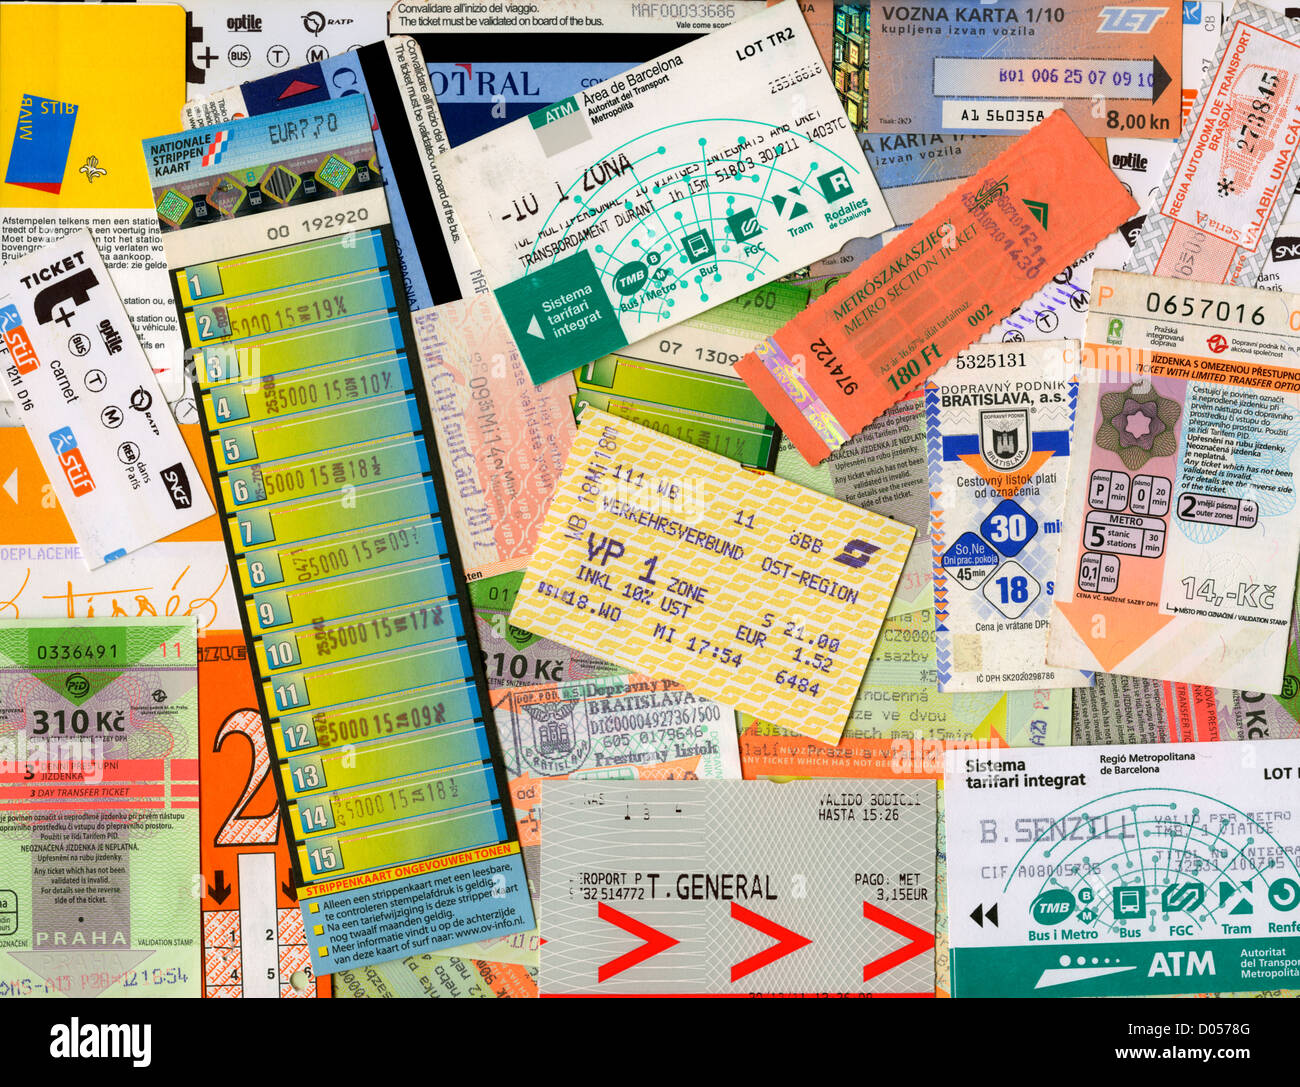 Public transport tickets from European cities (see 'description') Stock Photo